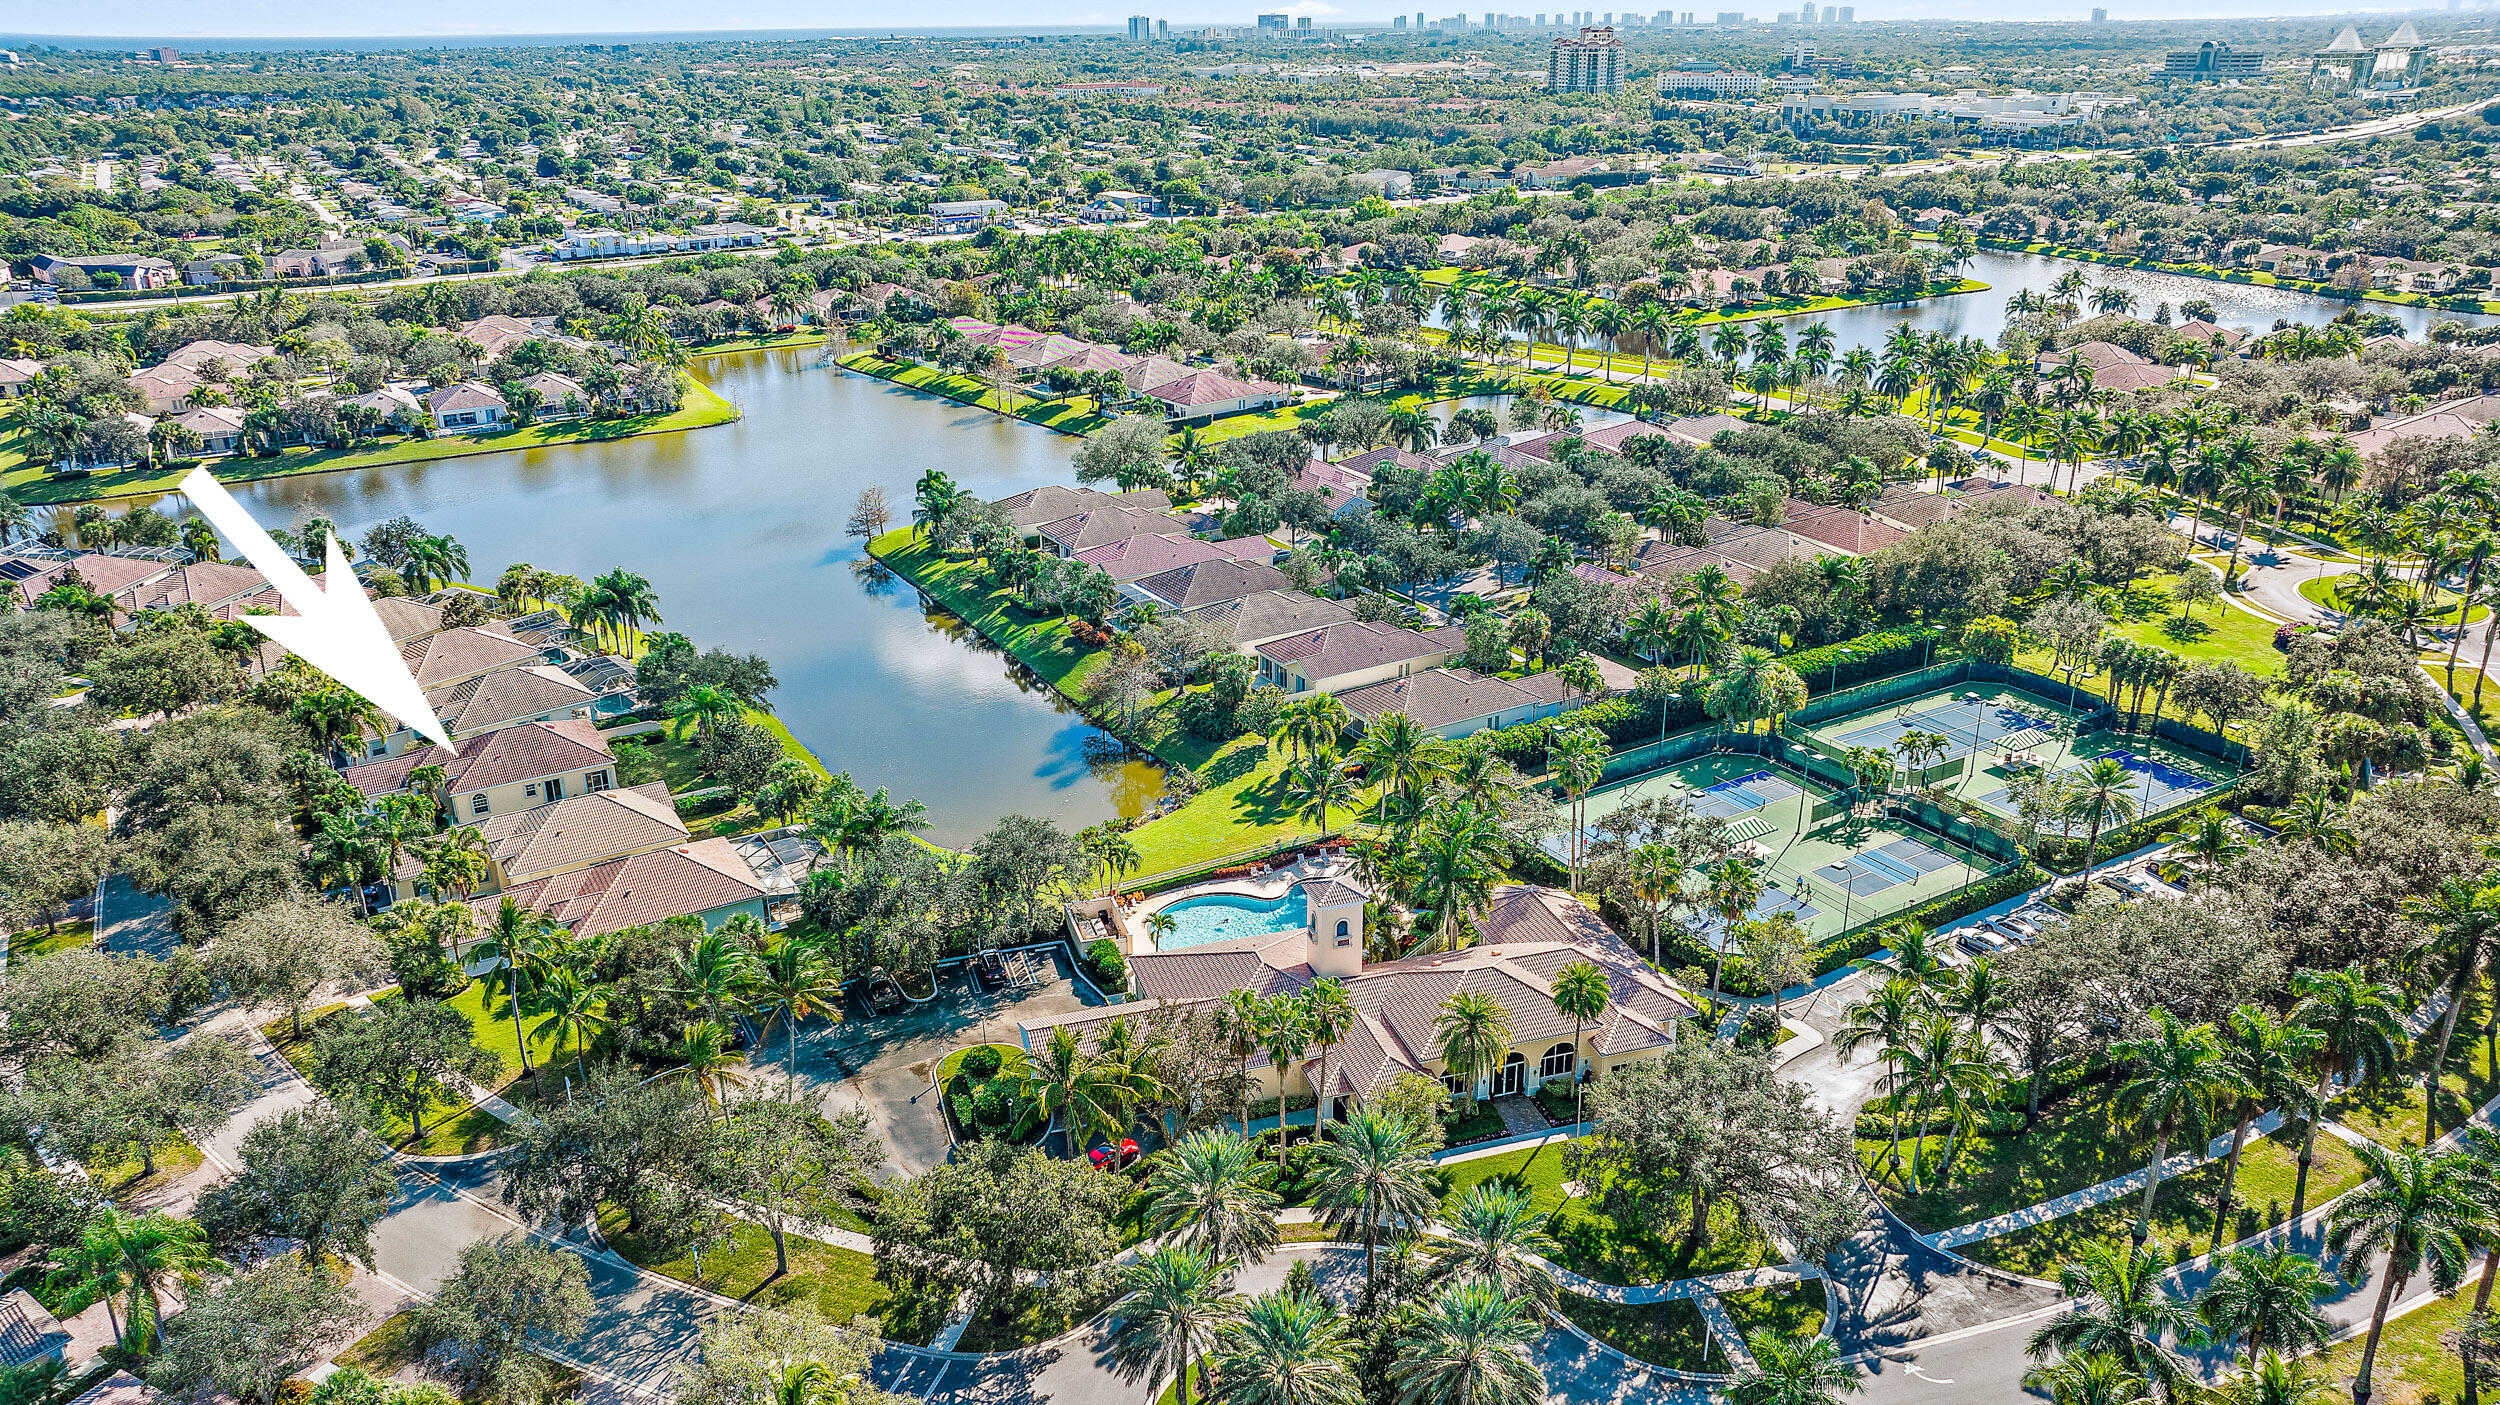 Enjoy south Florida living at its finest in this beautiful lakefront Oakmont model home in the highly desirable community of The Isles in Palm Beach Gardens.  Featuring 3 bedrooms plus a den, 2 bathrooms and a 2 car garage on an oversized lot with additional land (utility easement).  Best building construction with poured concrete walls/slab with full hurricane accordion shutters and cement barrel tile roof.  Home upgrades include Hunter Douglas Blinds, 2018 AC, 2021 hot water heater, 2021 disposal, Kenmore W/D with laundry sink 2017, upgraded ADT alarm system, new microwave 2022, lower custom pull-out storage cabinets, designer pendant lighting and upgraded decorative hardware installed. The home is well located next to the clubhouse, mailroom, community pool, fitness center, tennis courts and pickle ball. The Isles of Palm Beach Gardens is within minutes of some of the area's best beaches, golf courses, restaurants, shopping and offers easy access to the Interstate and Turnpike.